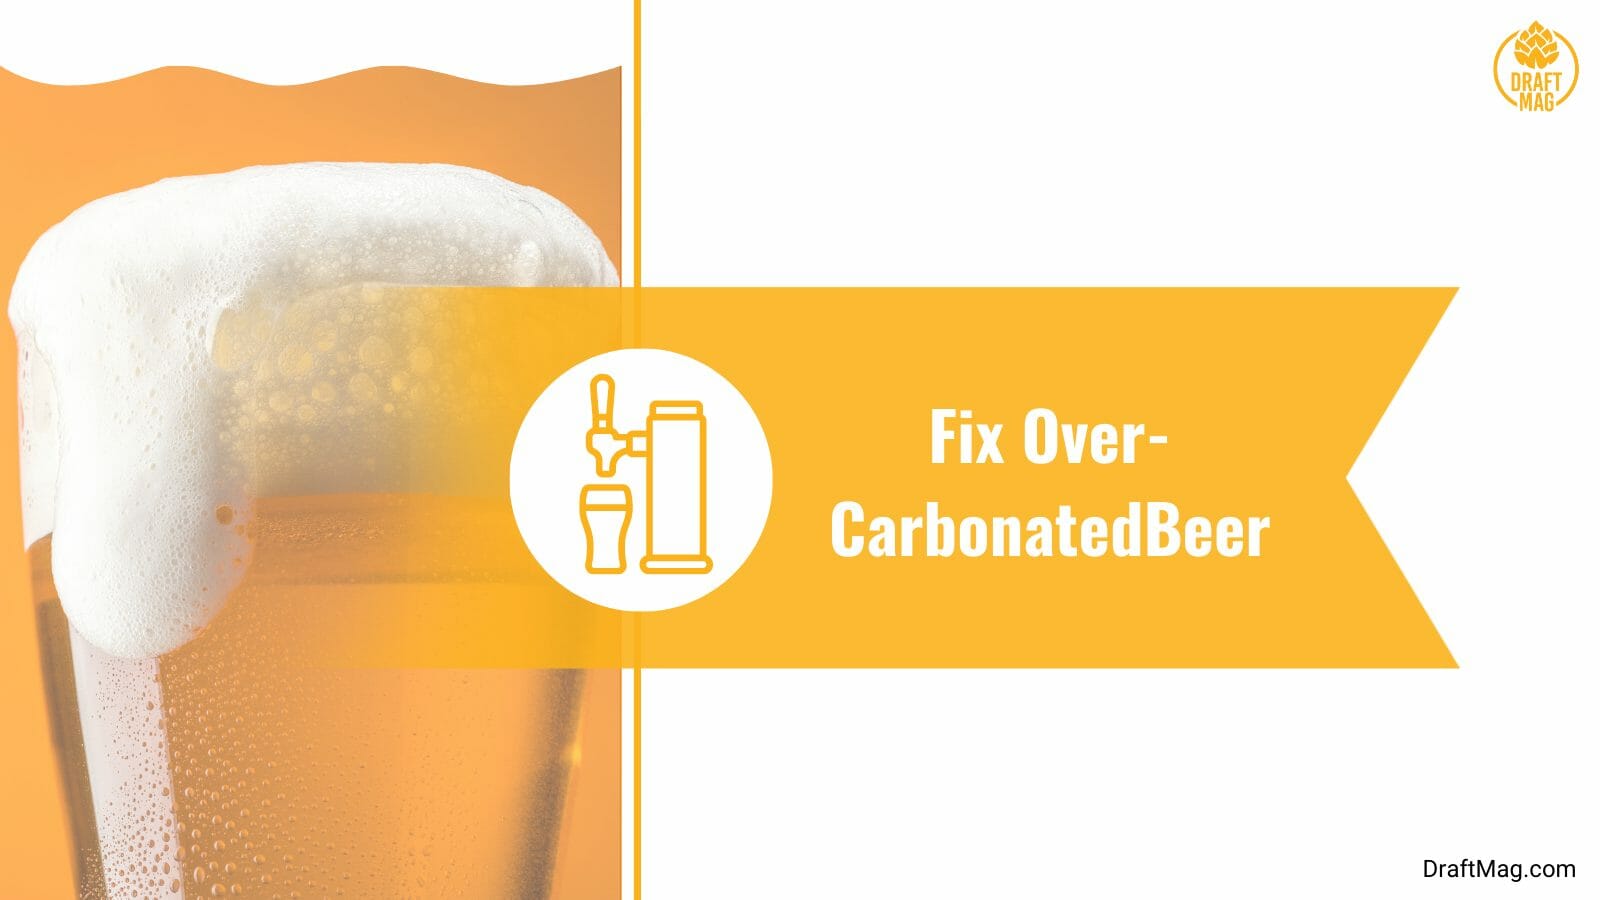 Fixxing Over Carbonated Beer in a Keg